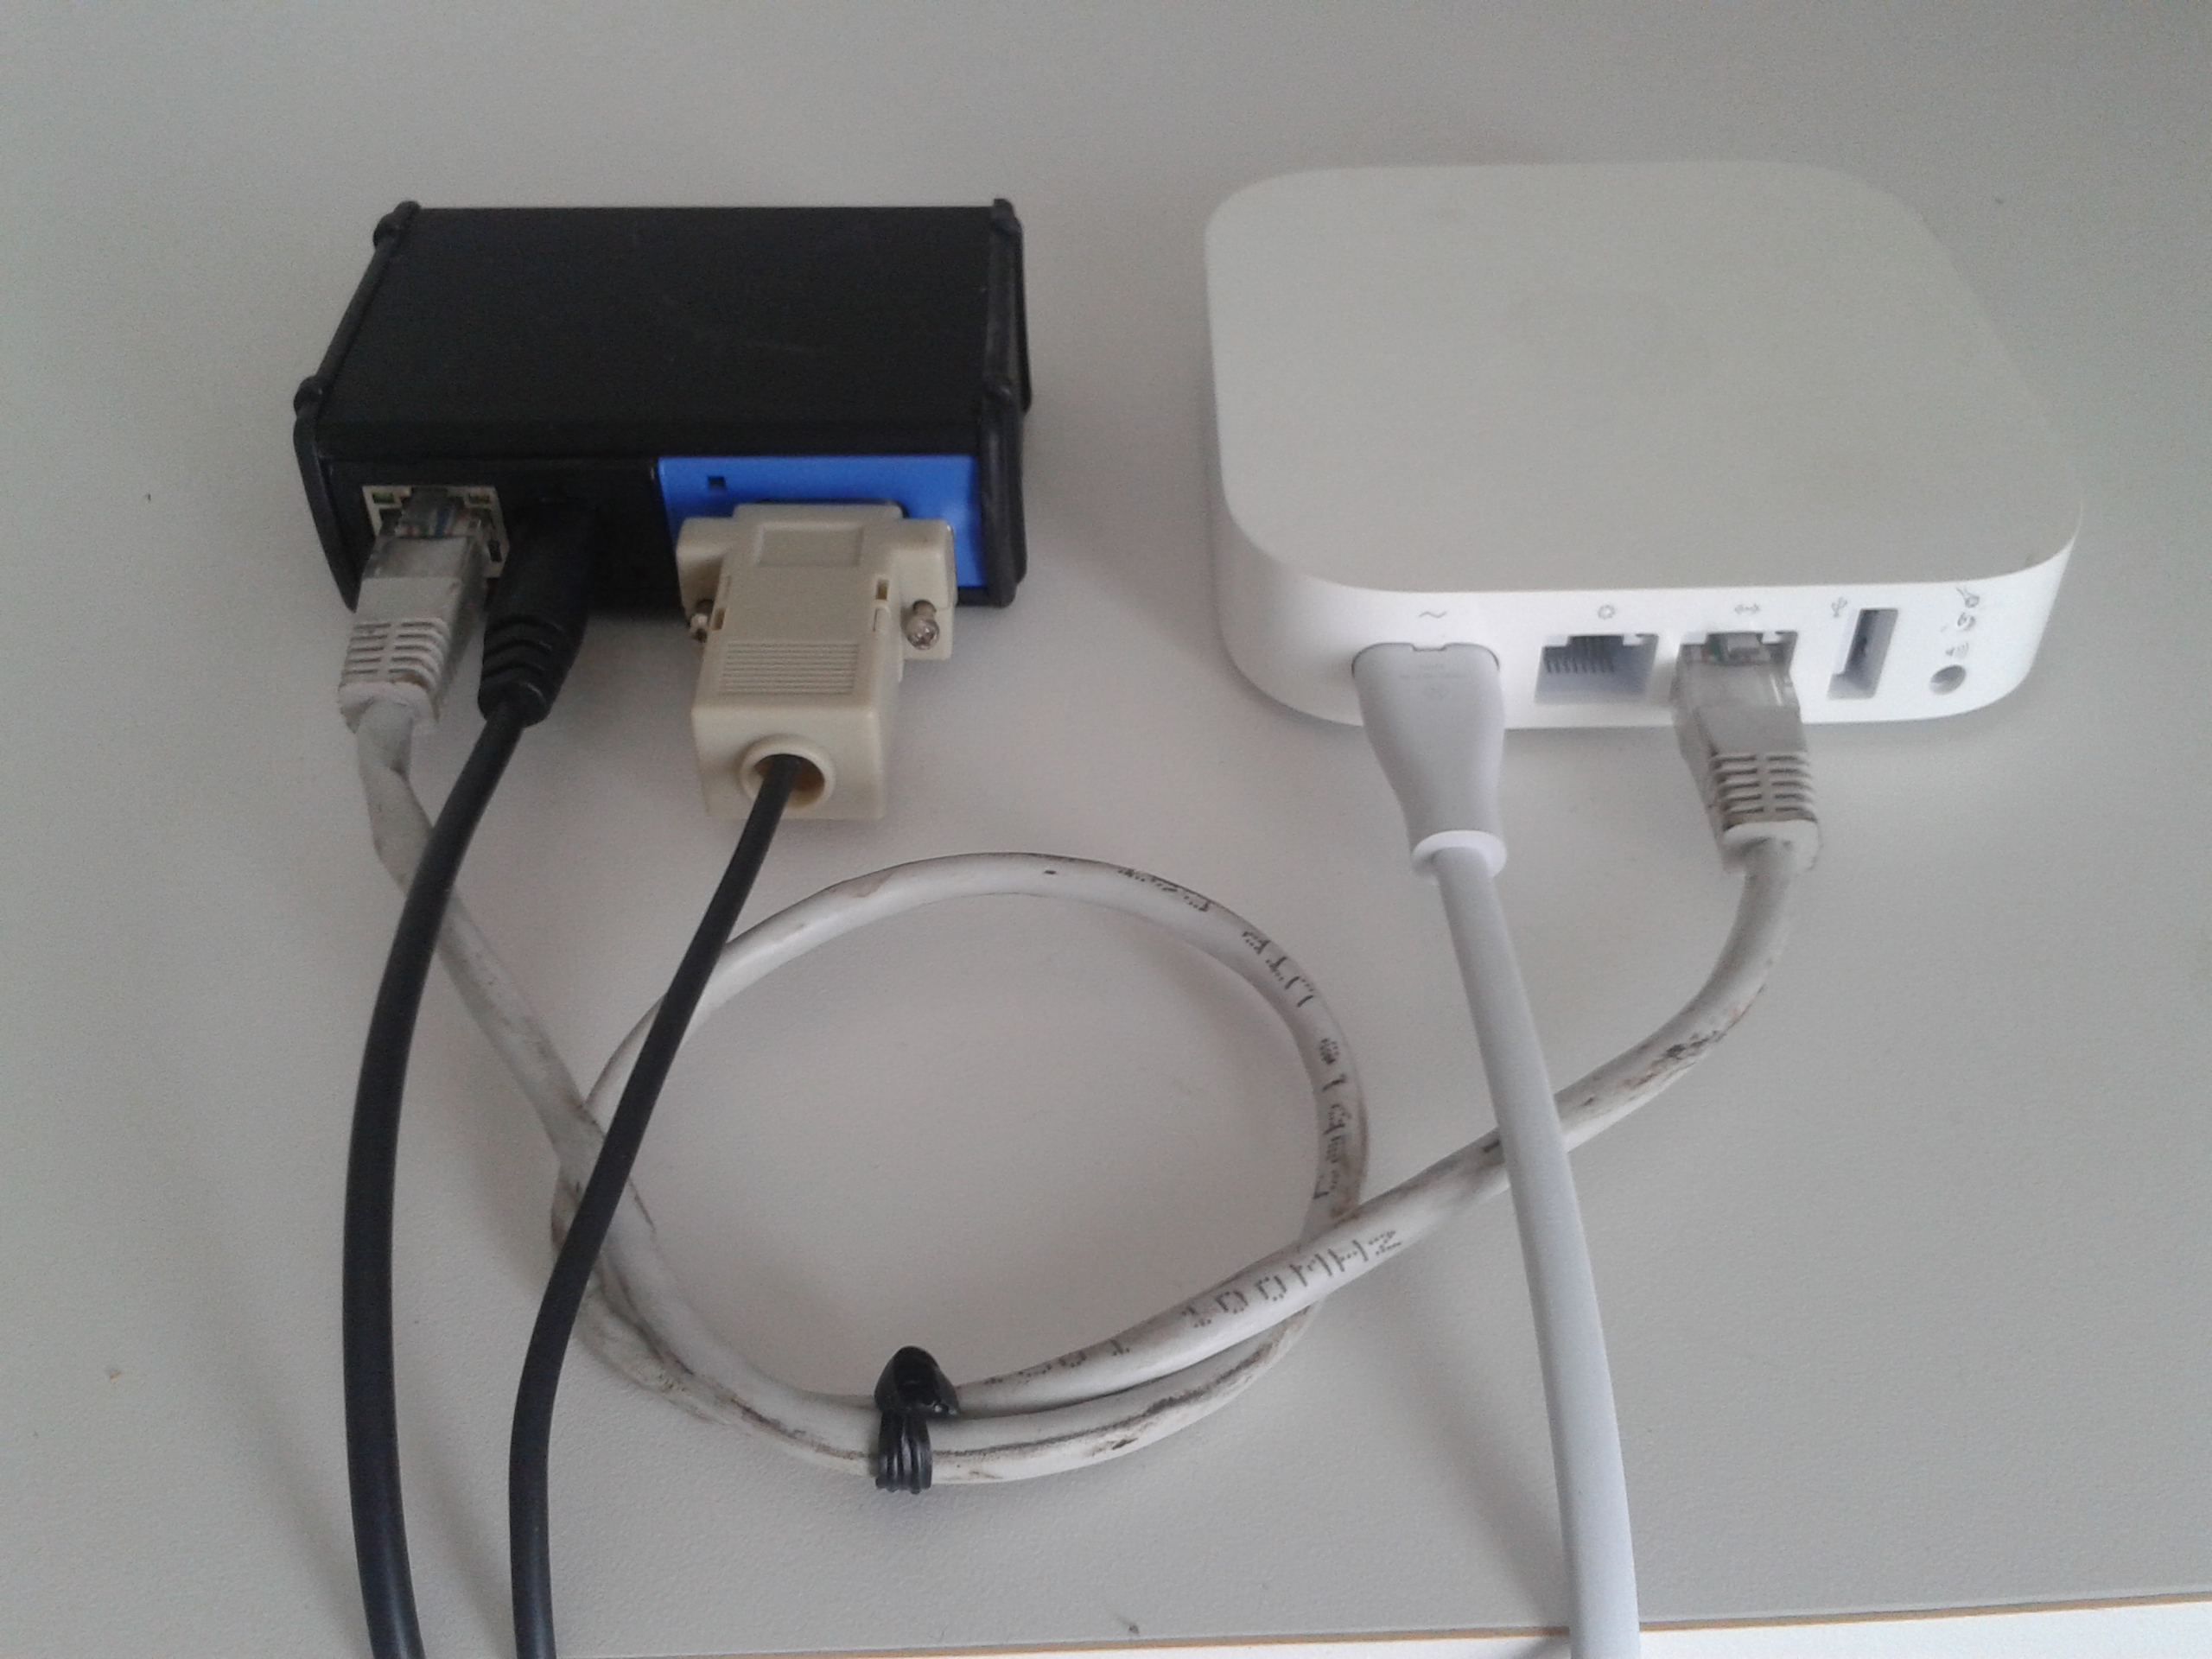 to setup Apple Airport Express to use as network for MyURemote and Global Caché - MyURemote - Remote Control App